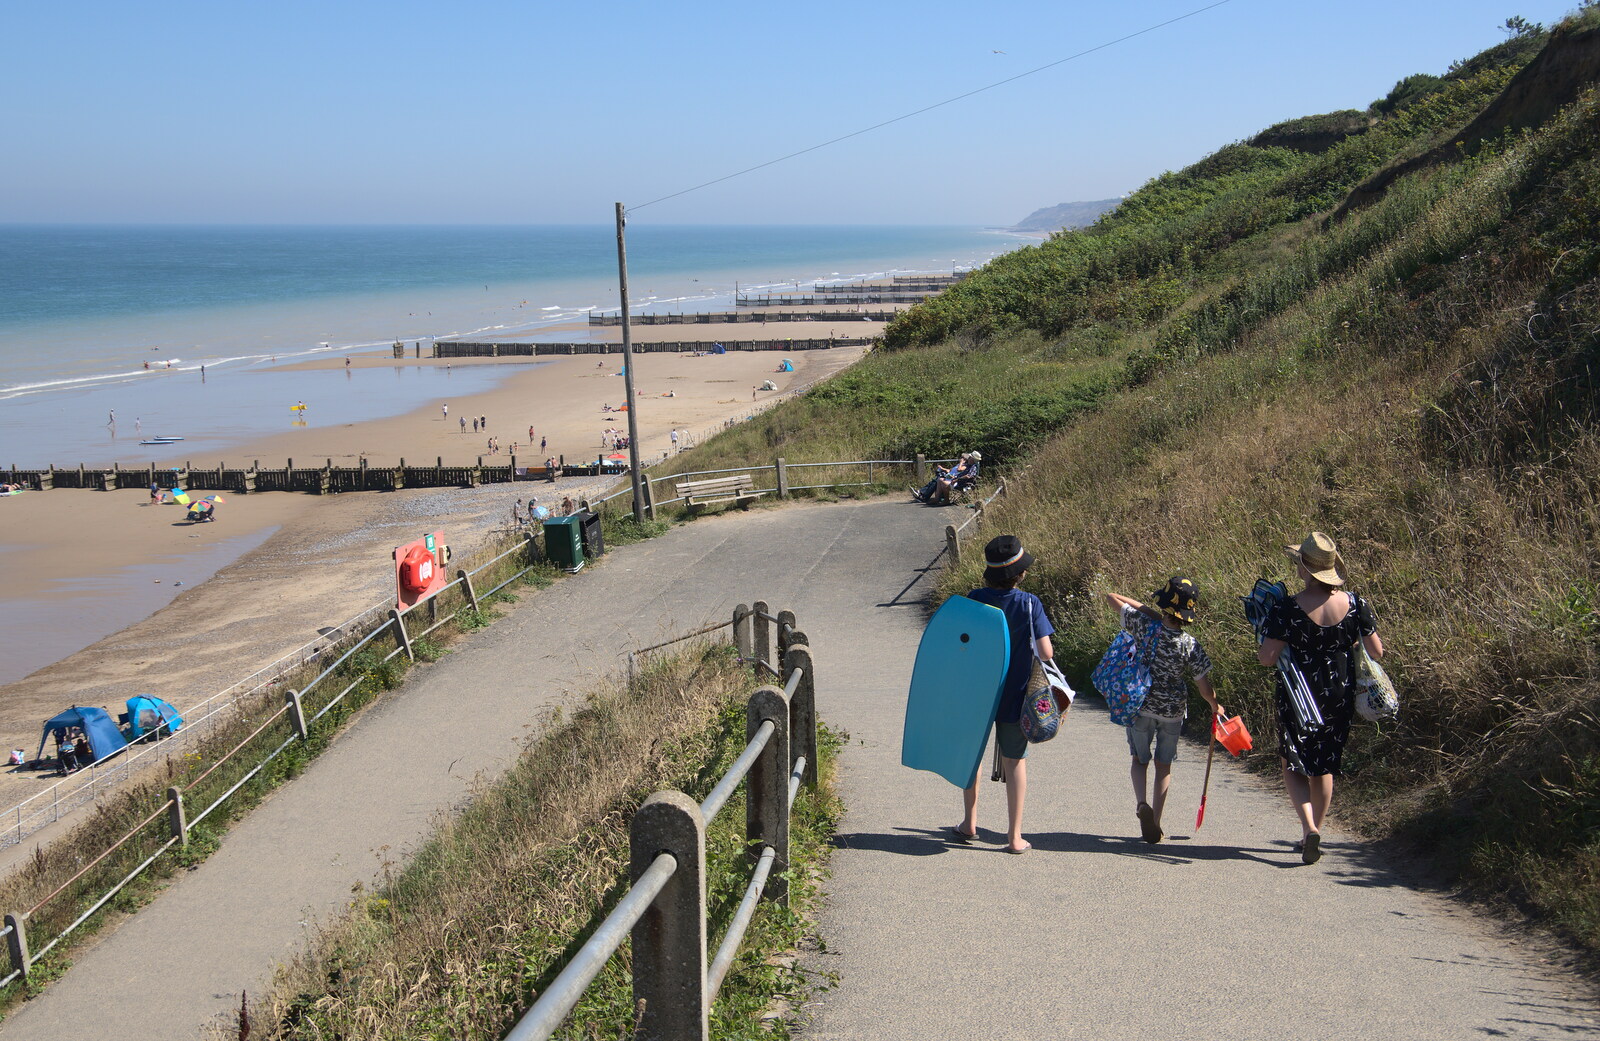 We head down to Overstrand beach from Camping at Forest Park, Cromer, Norfolk - 12th August 2022